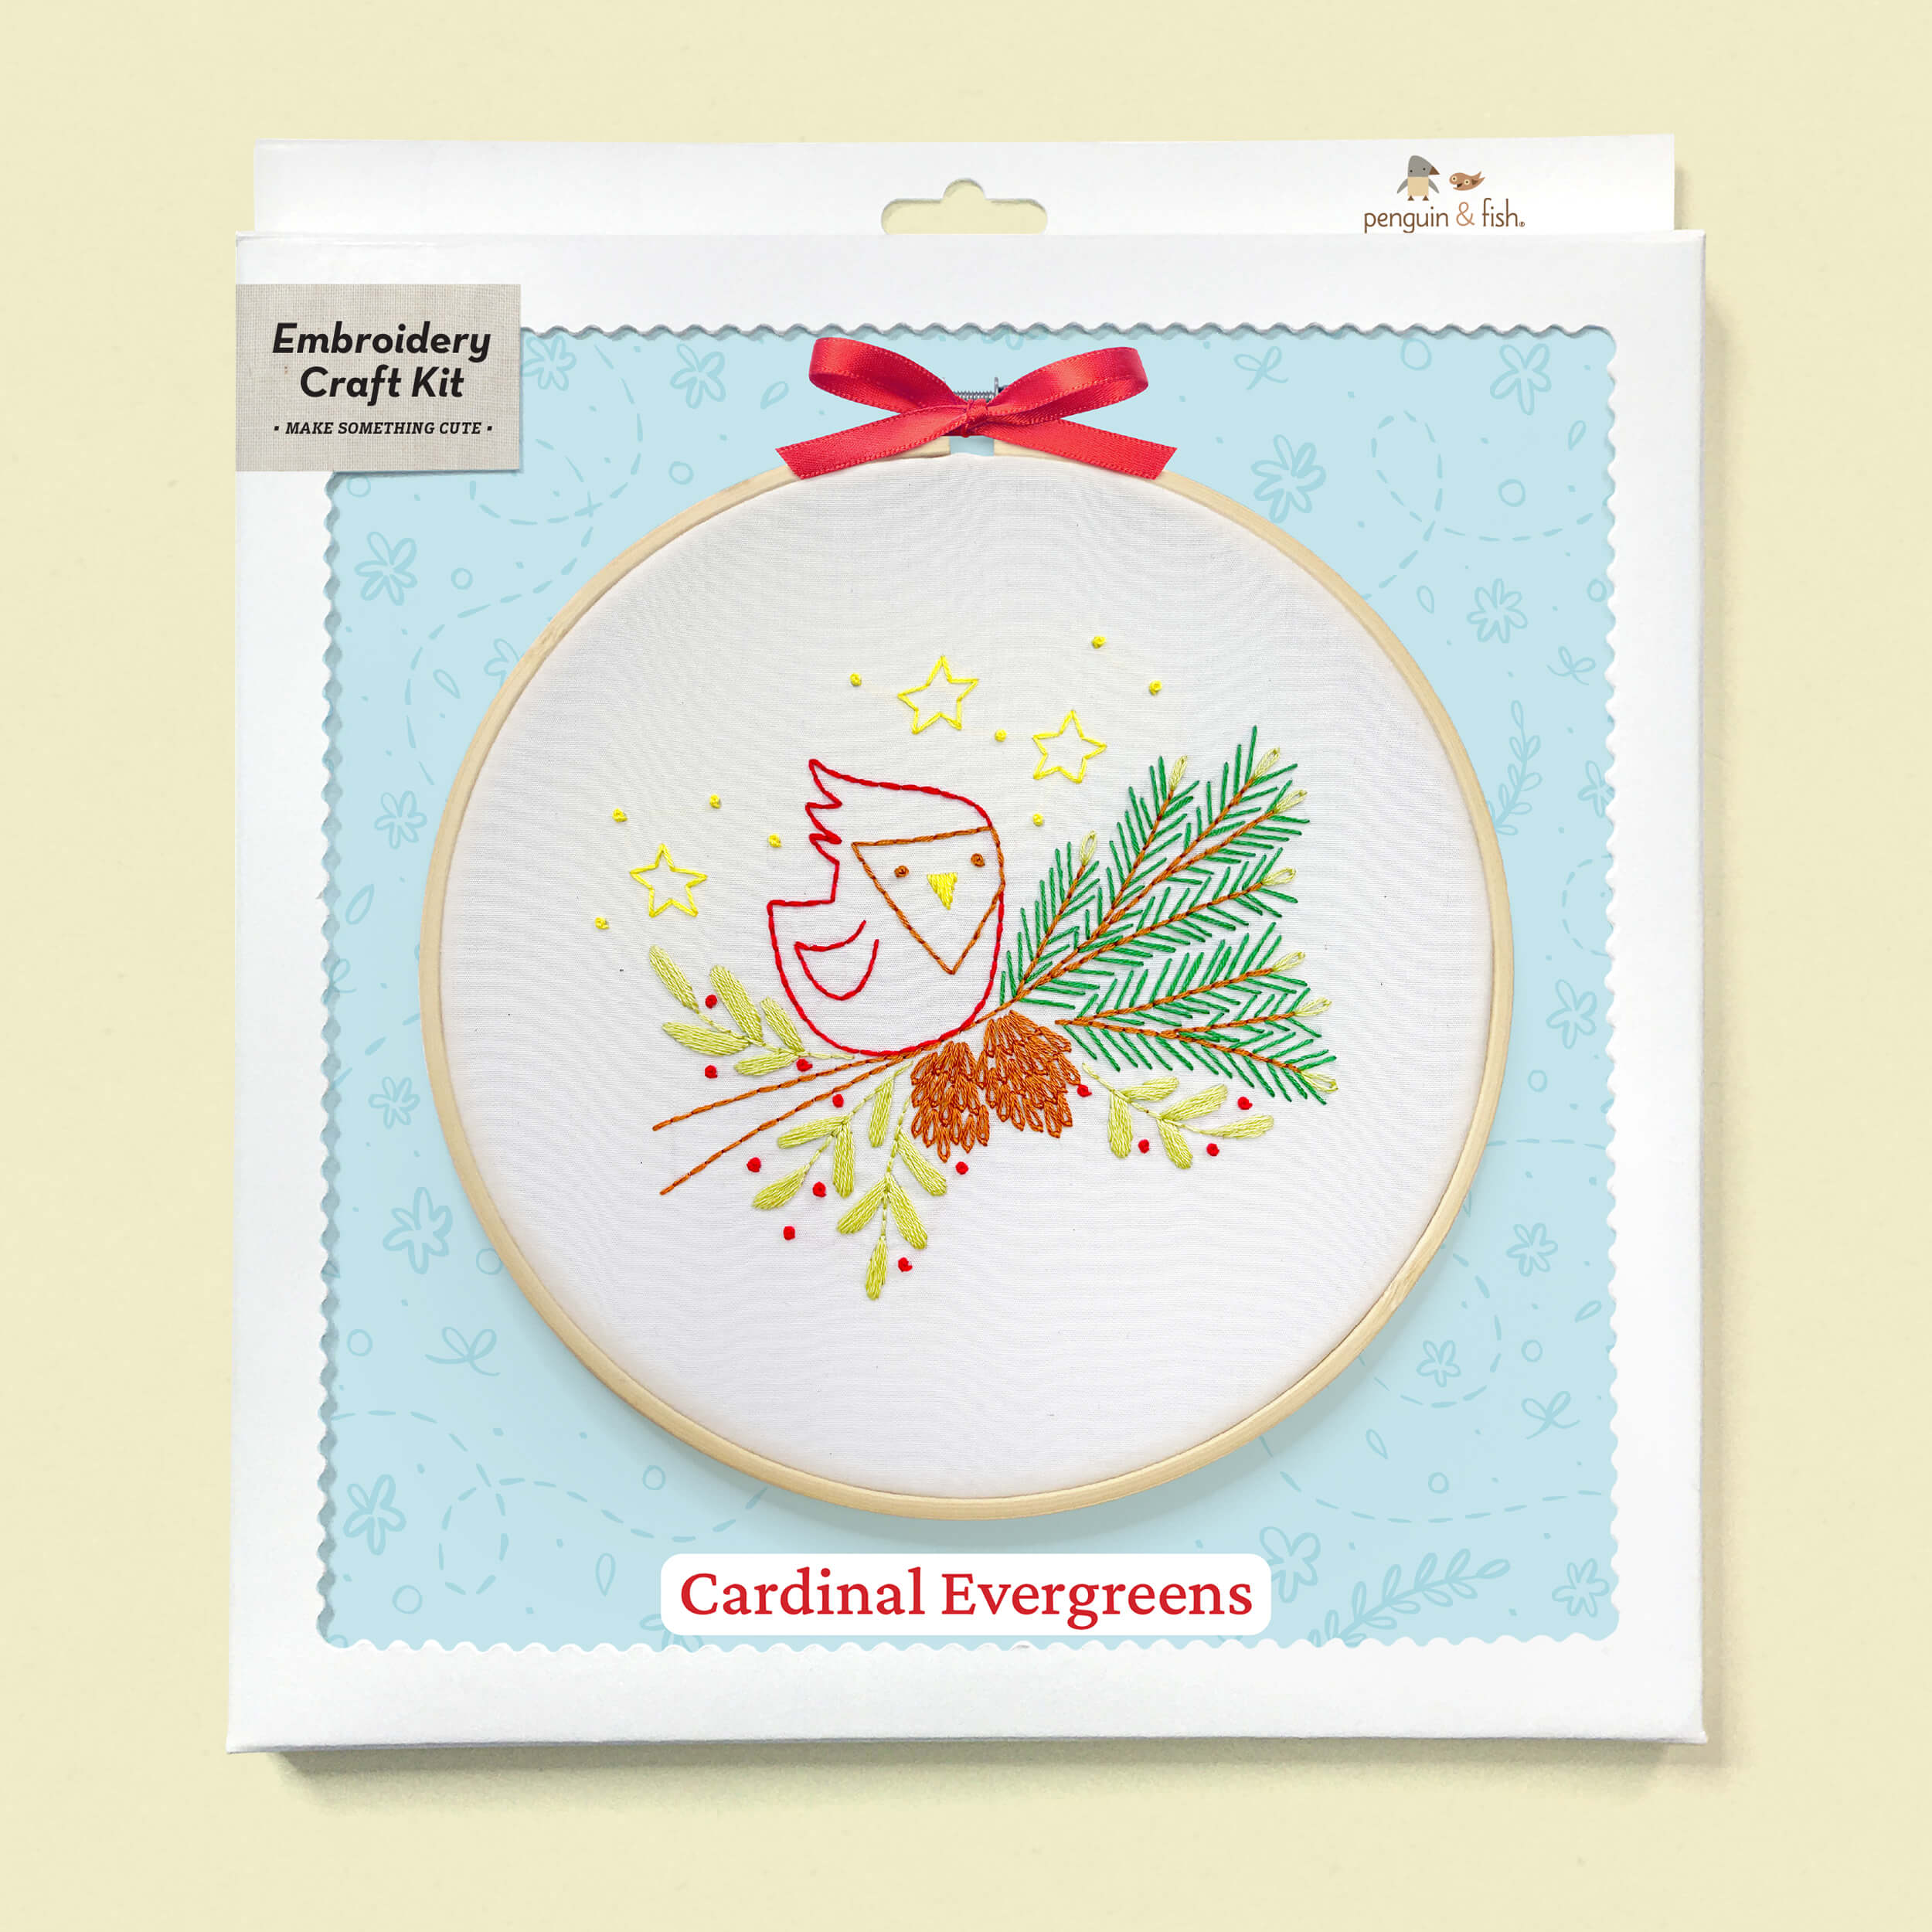 Cardinal Evergreens embroidery kit in a box